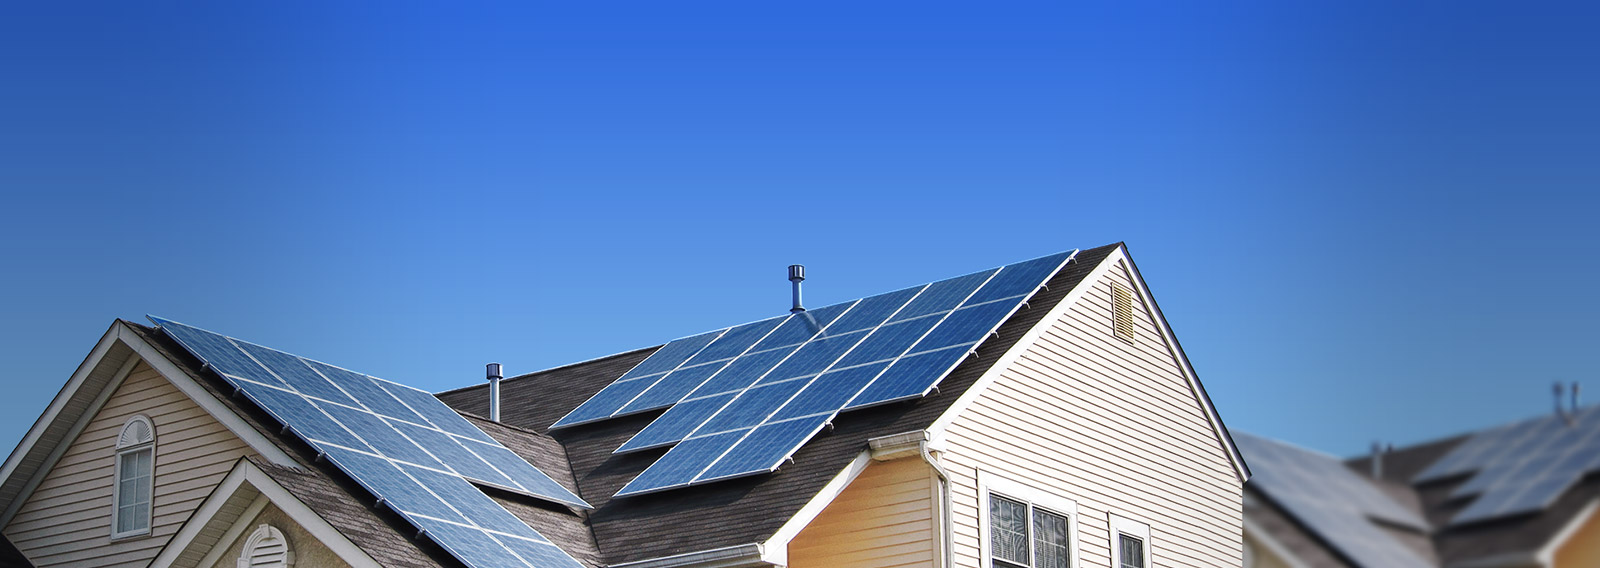 Save big money by going solar with Solar2Power.